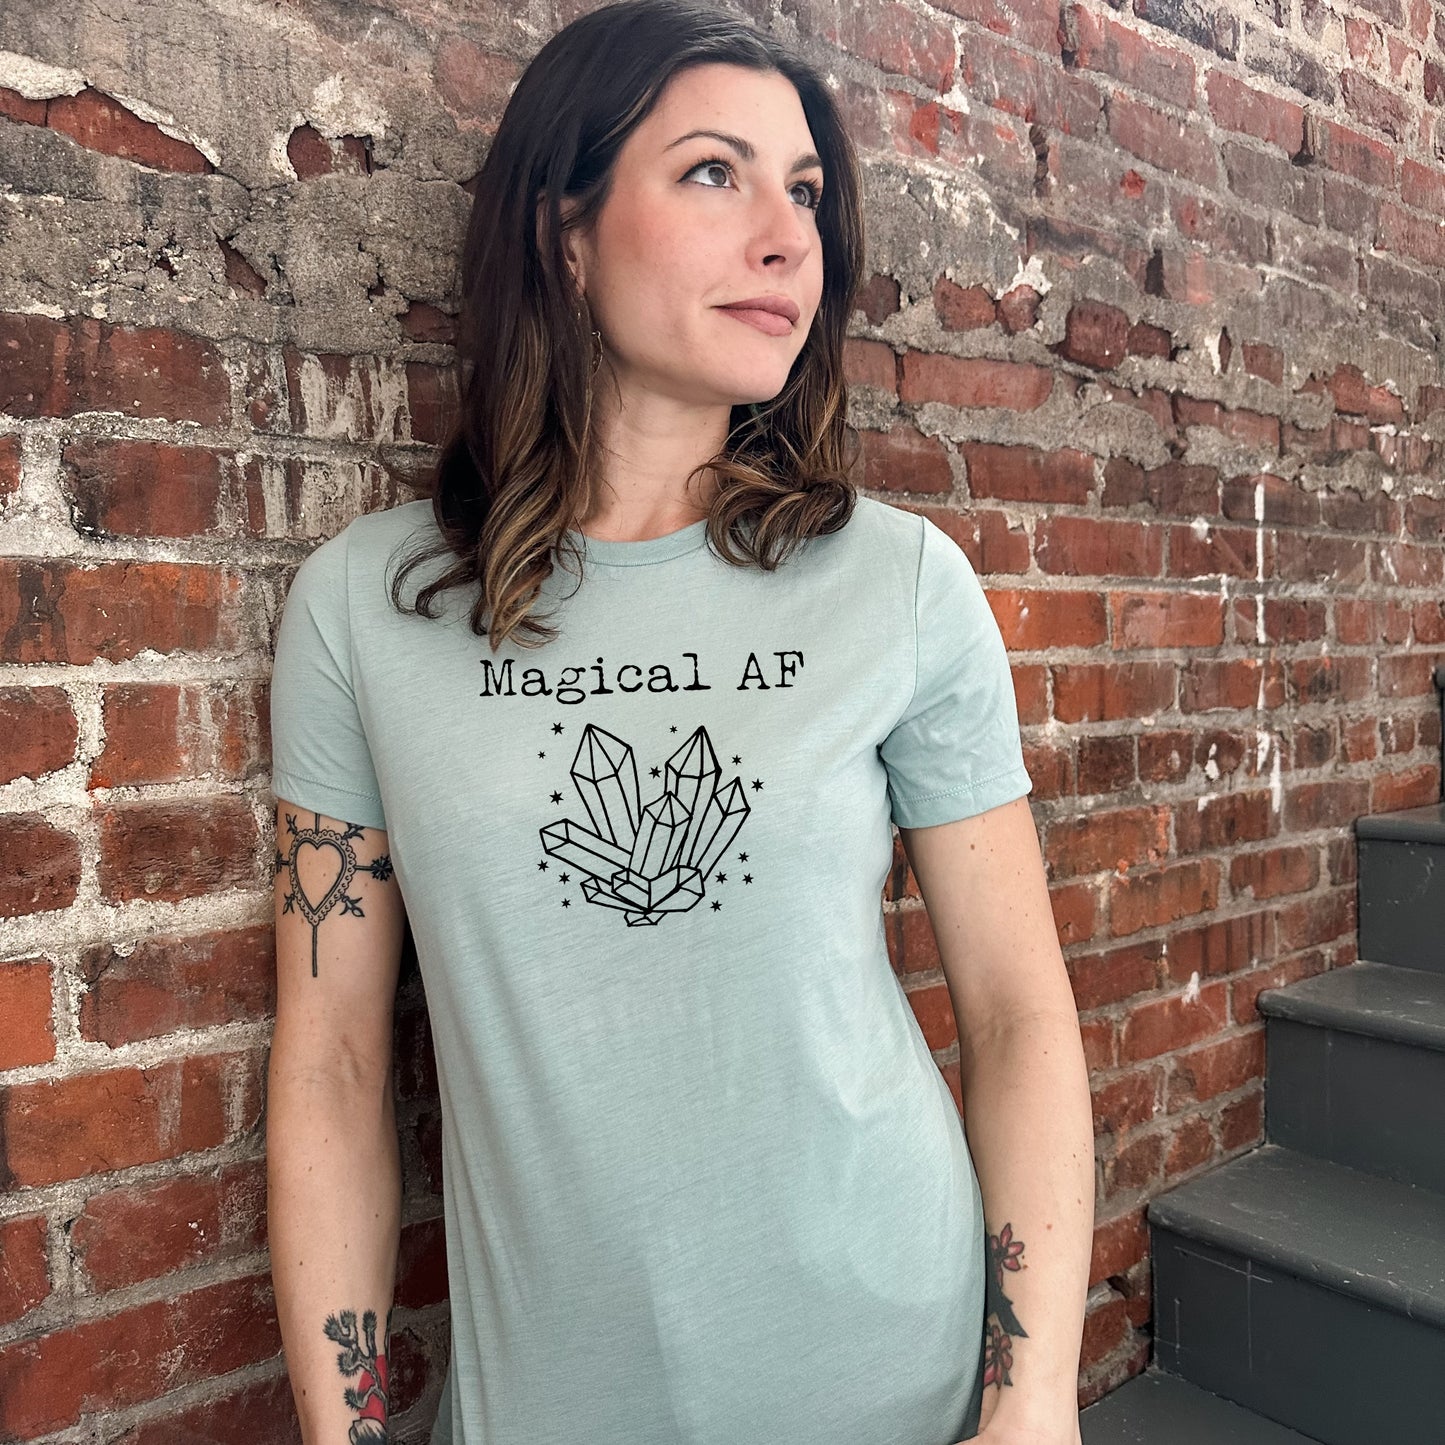 Magical AF - Women's Crew Tee - Olive or Dusty Blue